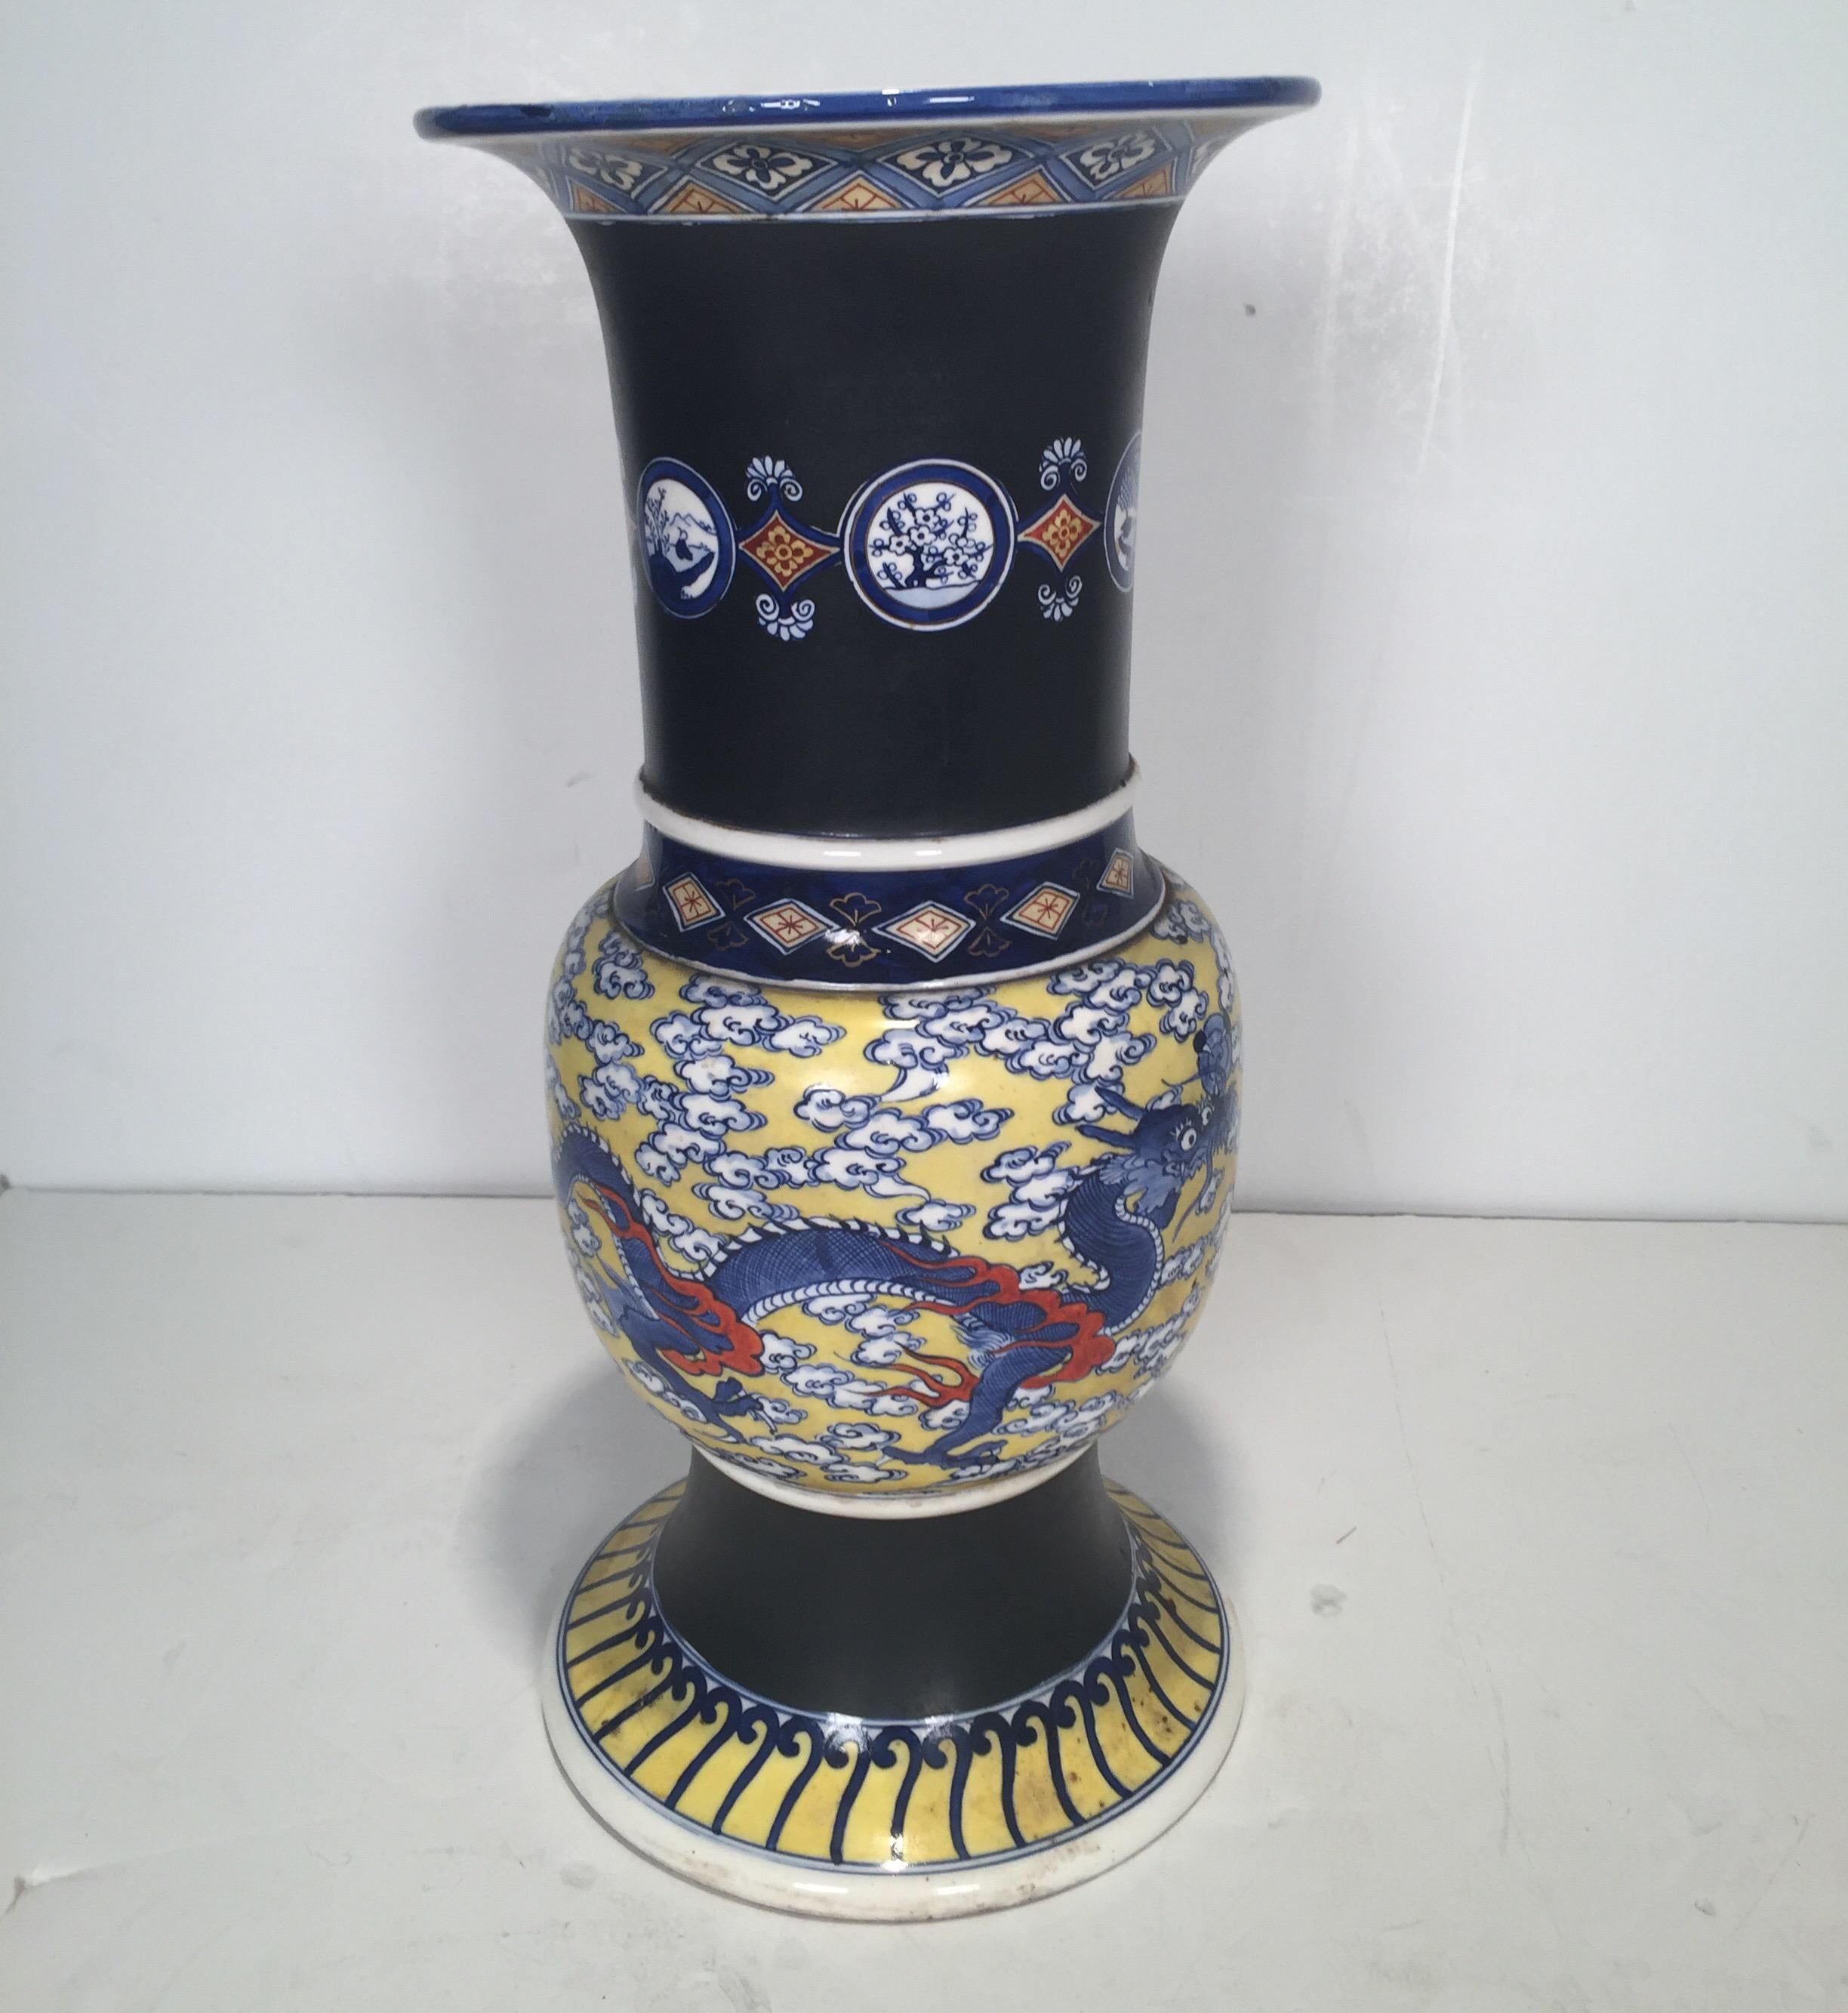 A magnificent Makuzu Kozan Studio Pottery vase circa 1900 in a striking color combination of black, yellow, red, and cobalt. Makuzu (1842-1916) was a master Japanese ceramist. He was appointed artist to the Japanese Imperial household and was one of